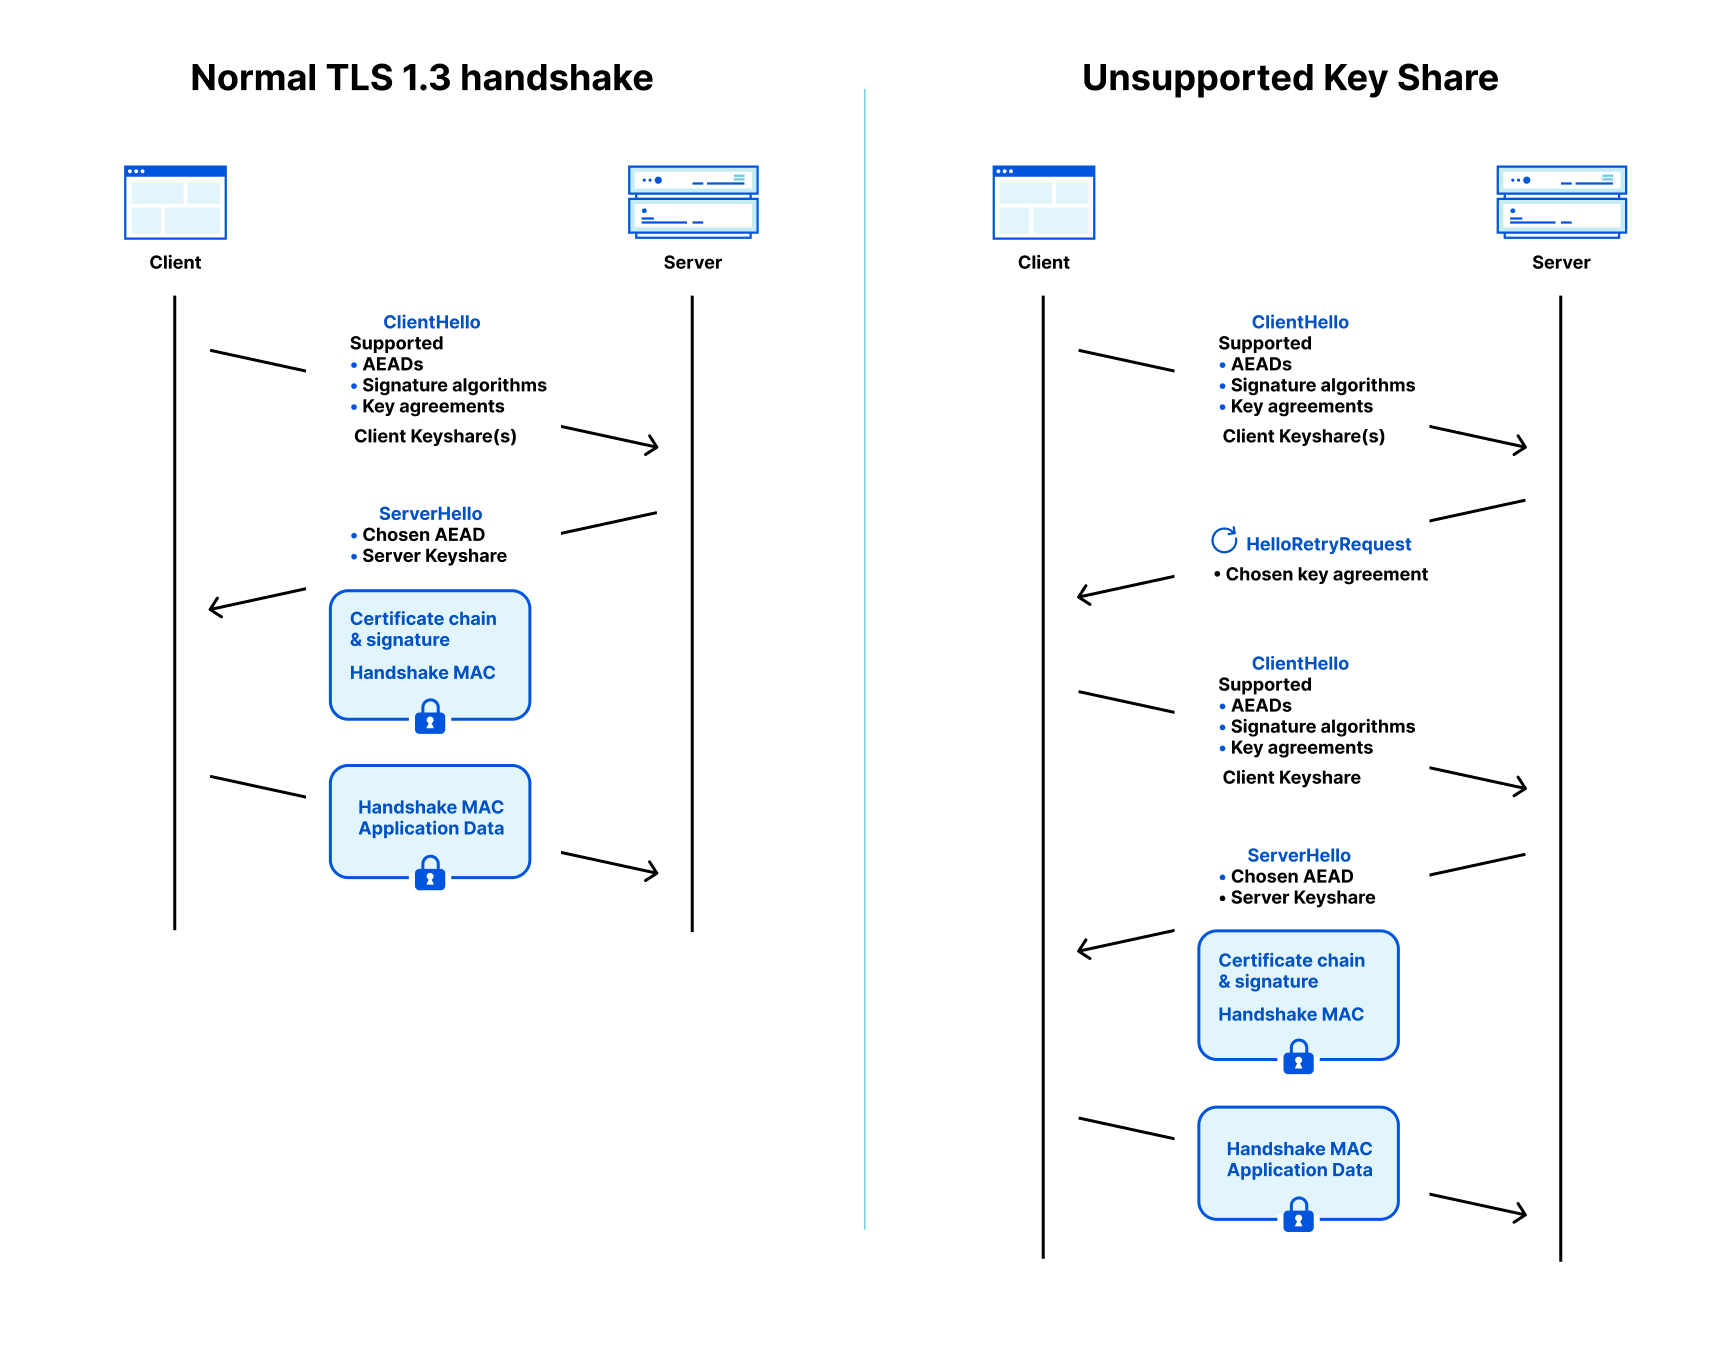 Protocol flow for server-authenticated TLS 1.3 with a supported client keyshare on the left and a HelloRetryRequest on the right.